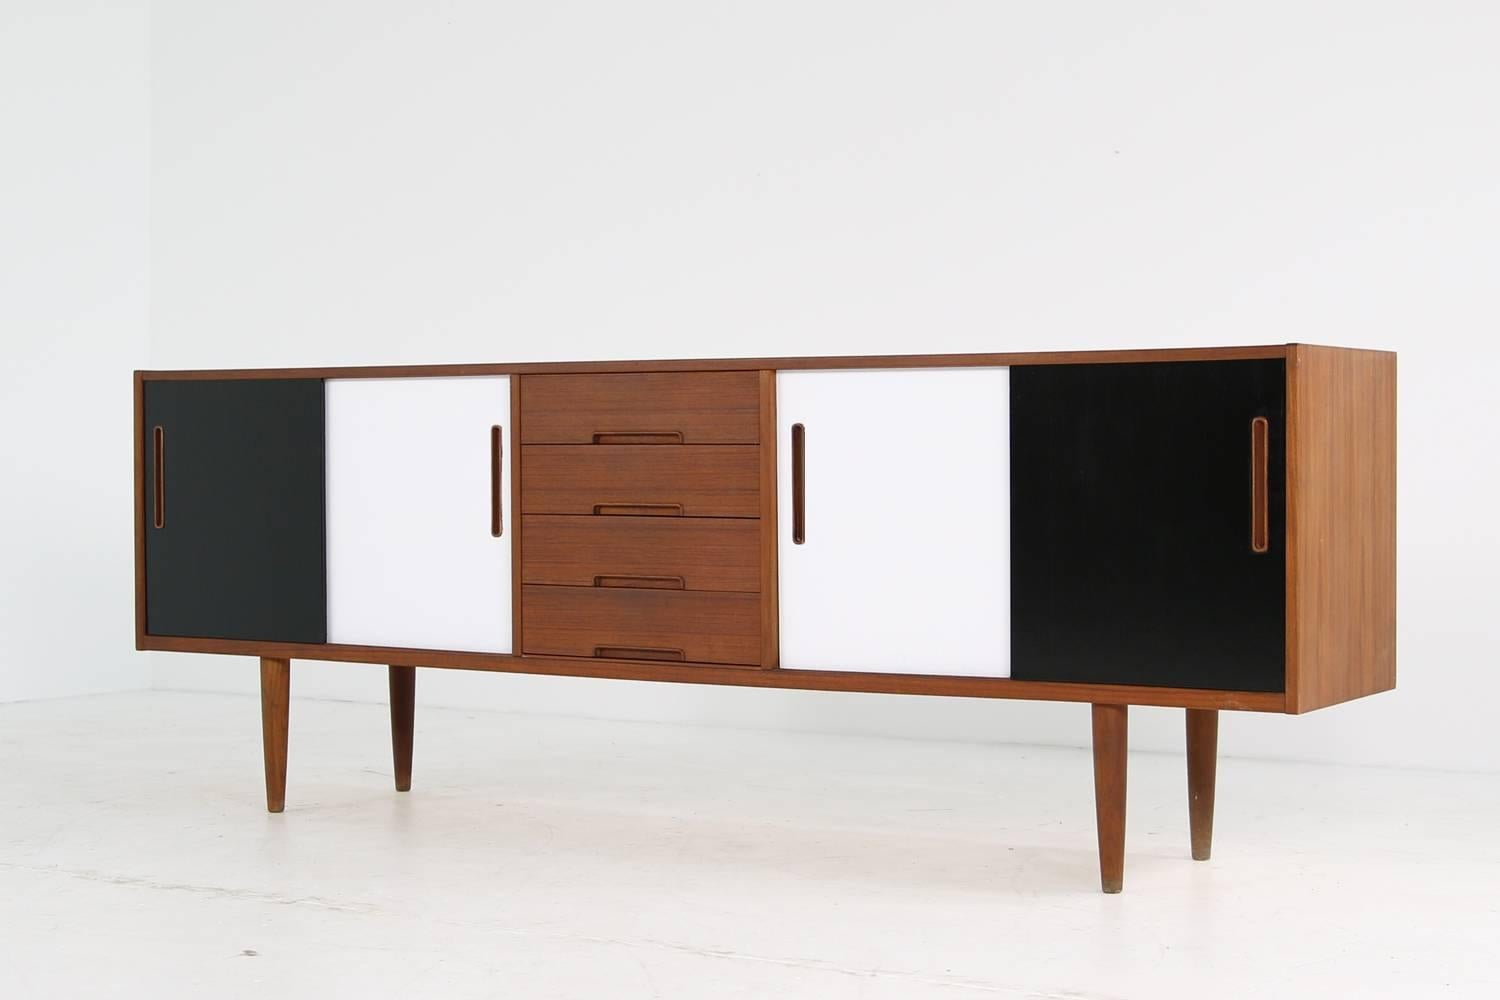 Beautiful 1960s sideboard by Nils Jonsson, made in Sweden by Troeds. Teak sideboard in very good condition, the top is very good, the painted sliding doors in black & white look great. Maple wood inside, four drawers. Rare piece in a fantastic look